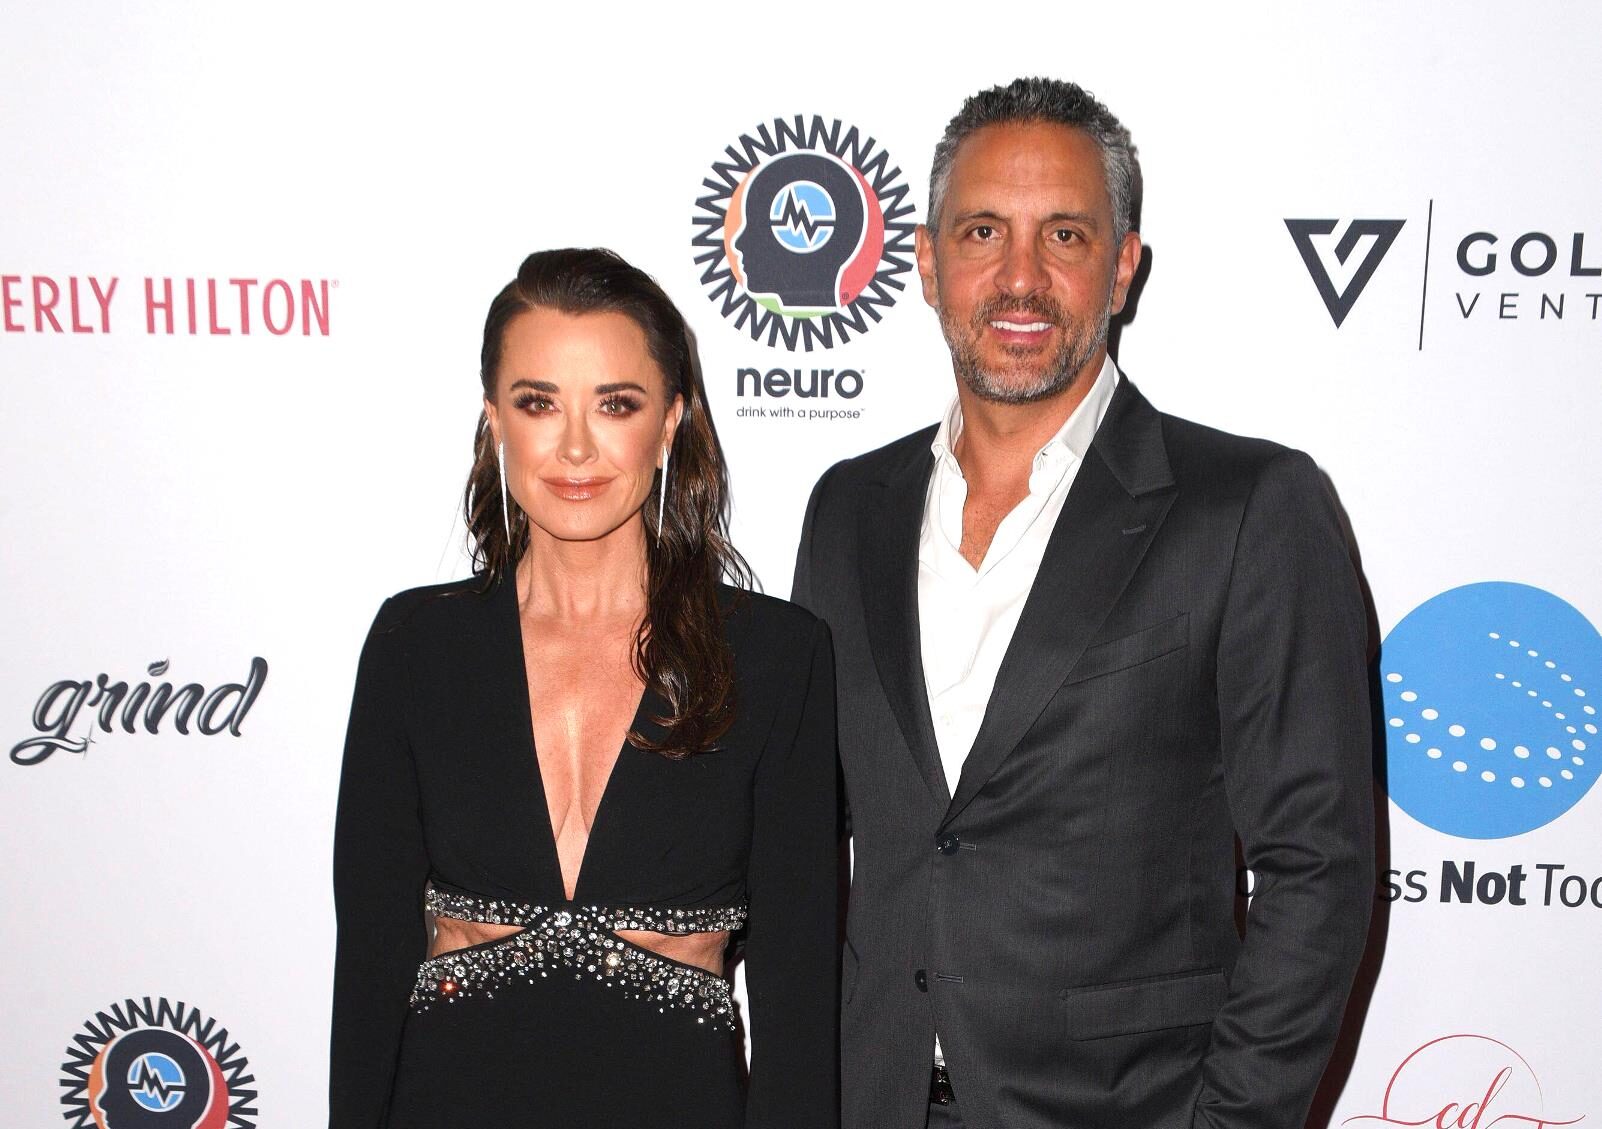 PHOTOS: Mauricio Umansky Removes Wedding Ring After Kyle's Steamy Music Video With Morgan Wade as Insider Shares Why Kyle is "Drawn" to Morgan